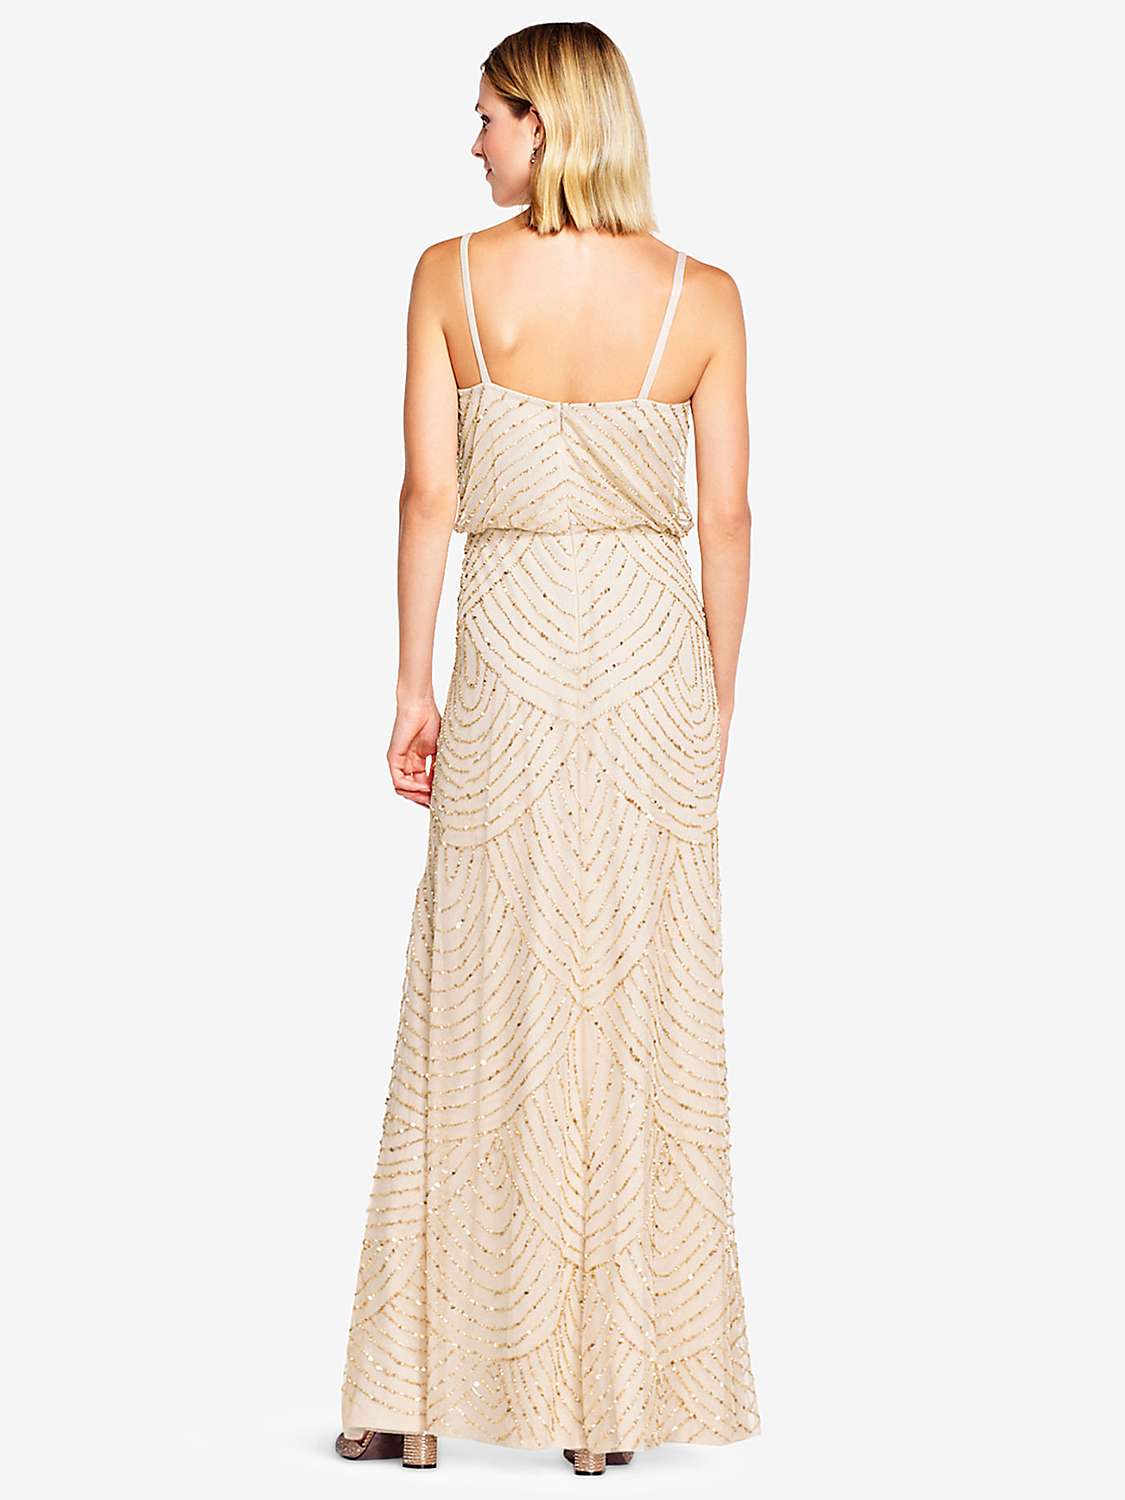 Buy Adrianna Papell Sleeveless Blouson Beaded Gown Online at johnlewis.com